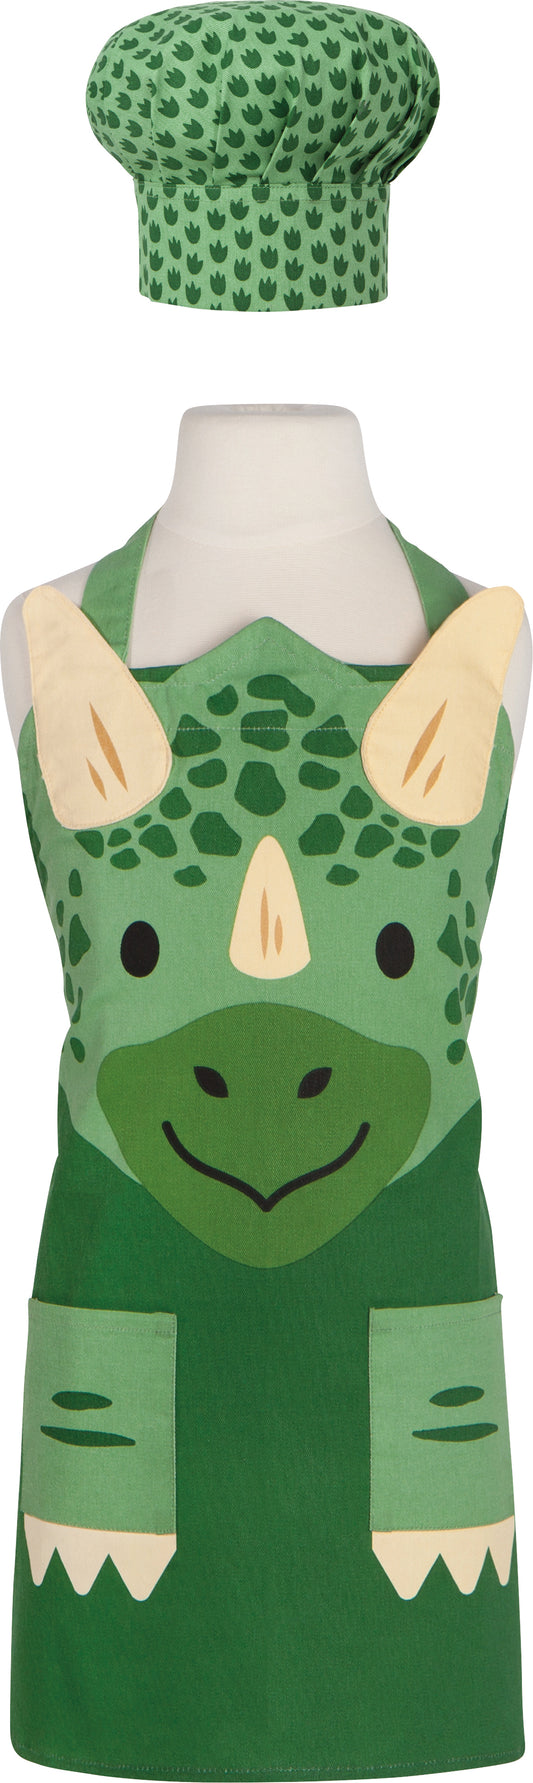 Daydream Dino Kid's Apron and Chef's Hat